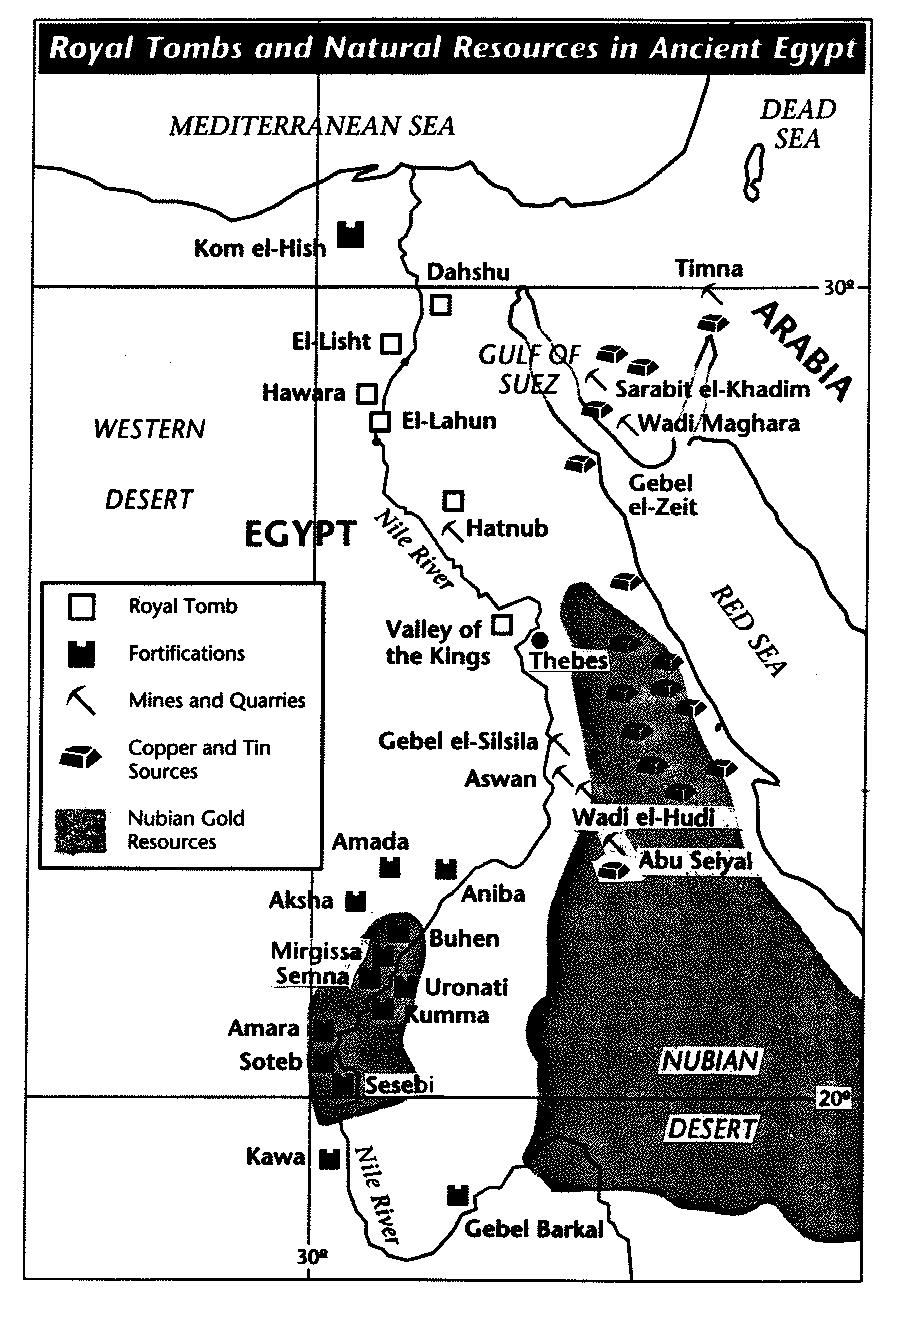 18. Base your answer to the following question on the map below and on your knowledge of social studies. What does this map show about the Nile River in ancient Egypt?